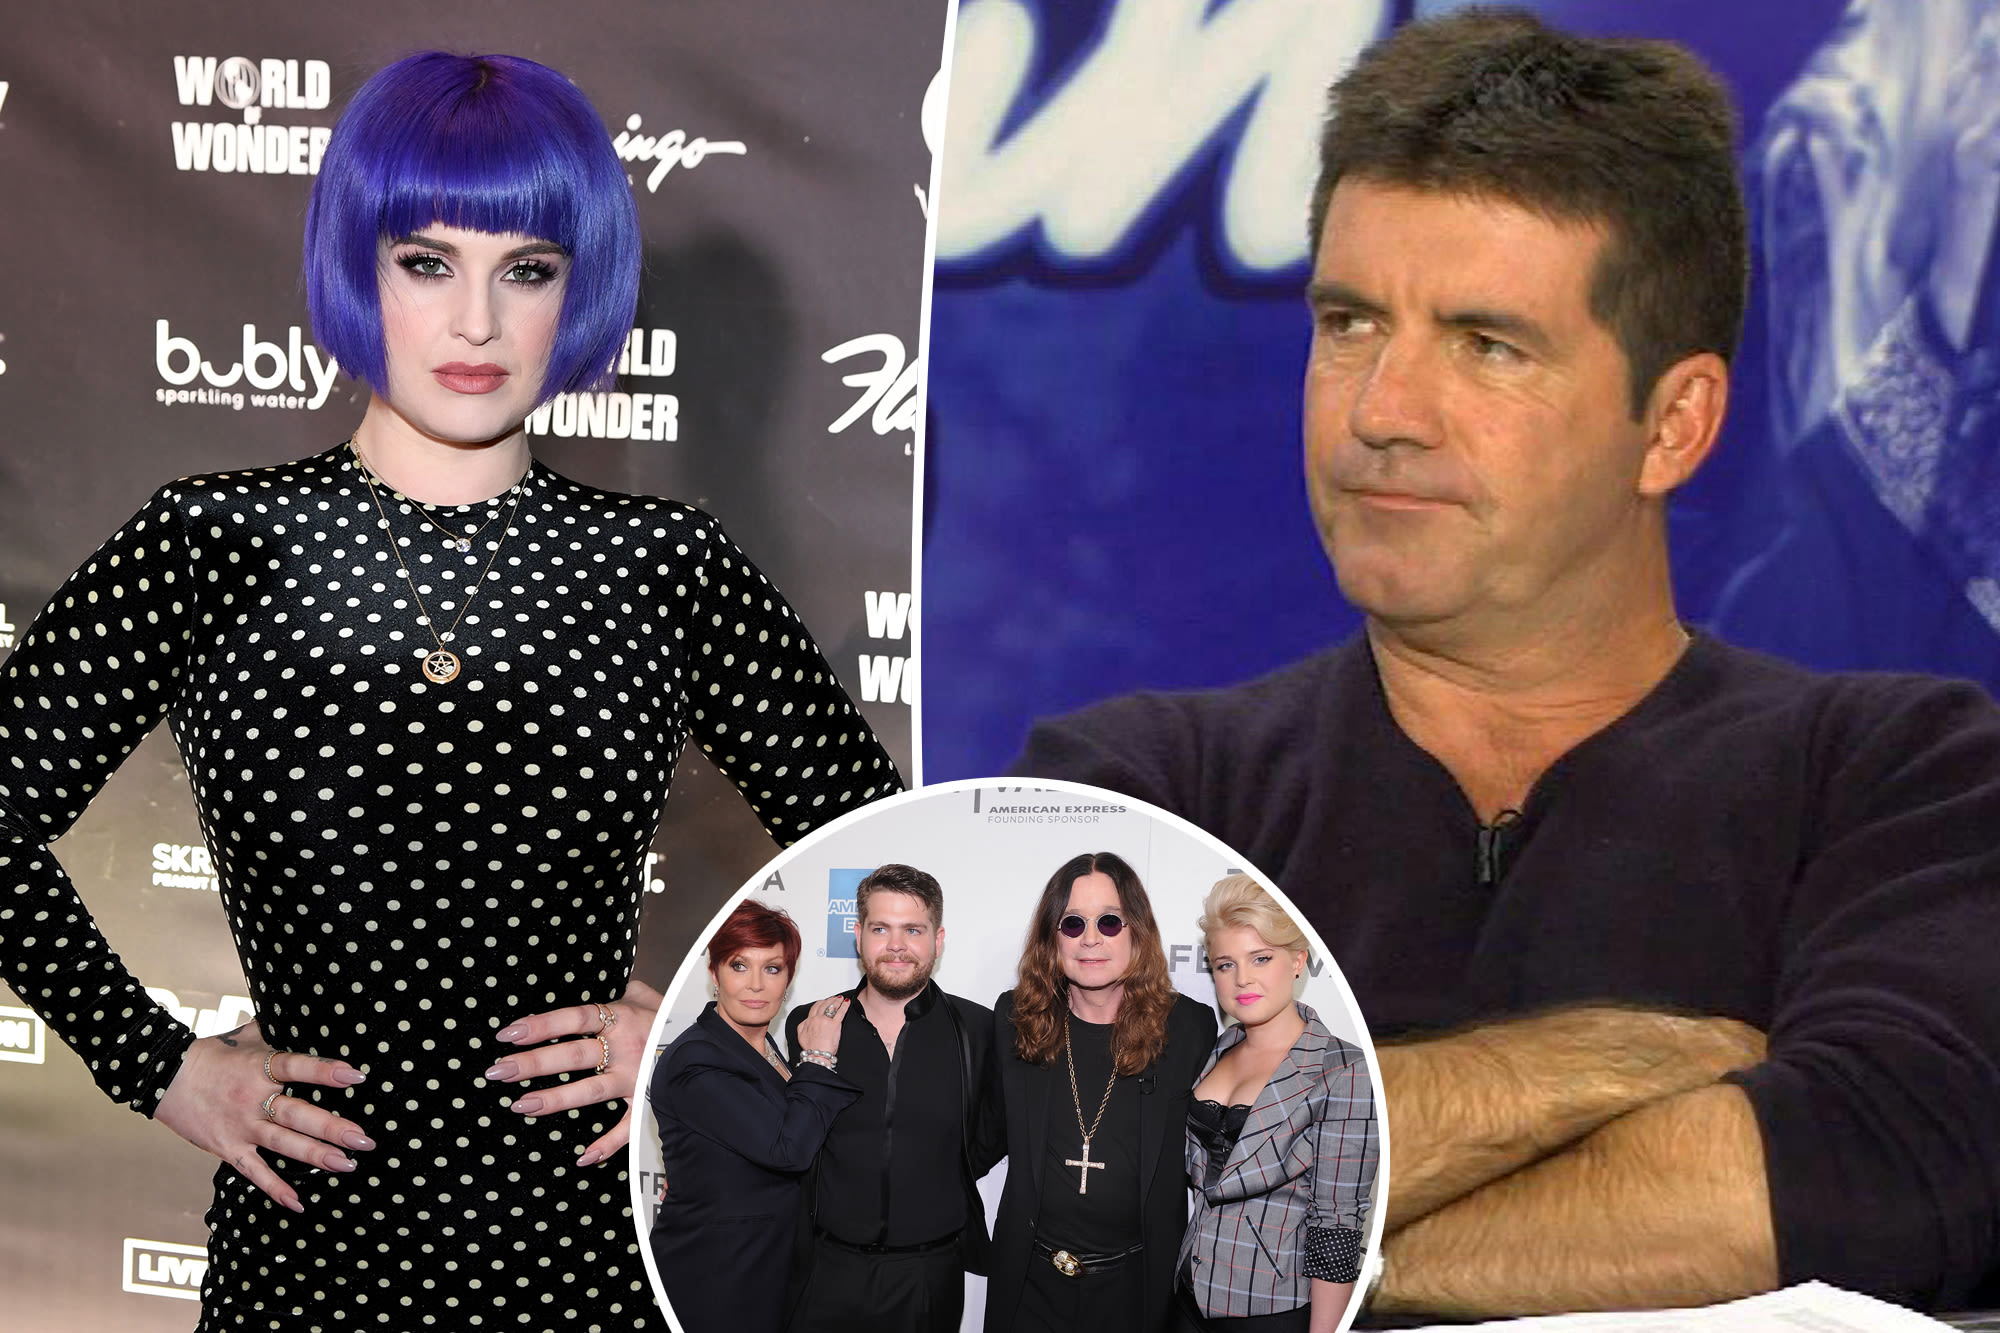 Kelly Osbourne claims Simon Cowell ‘threw a s–t fit,’ had her family yanked off TV set